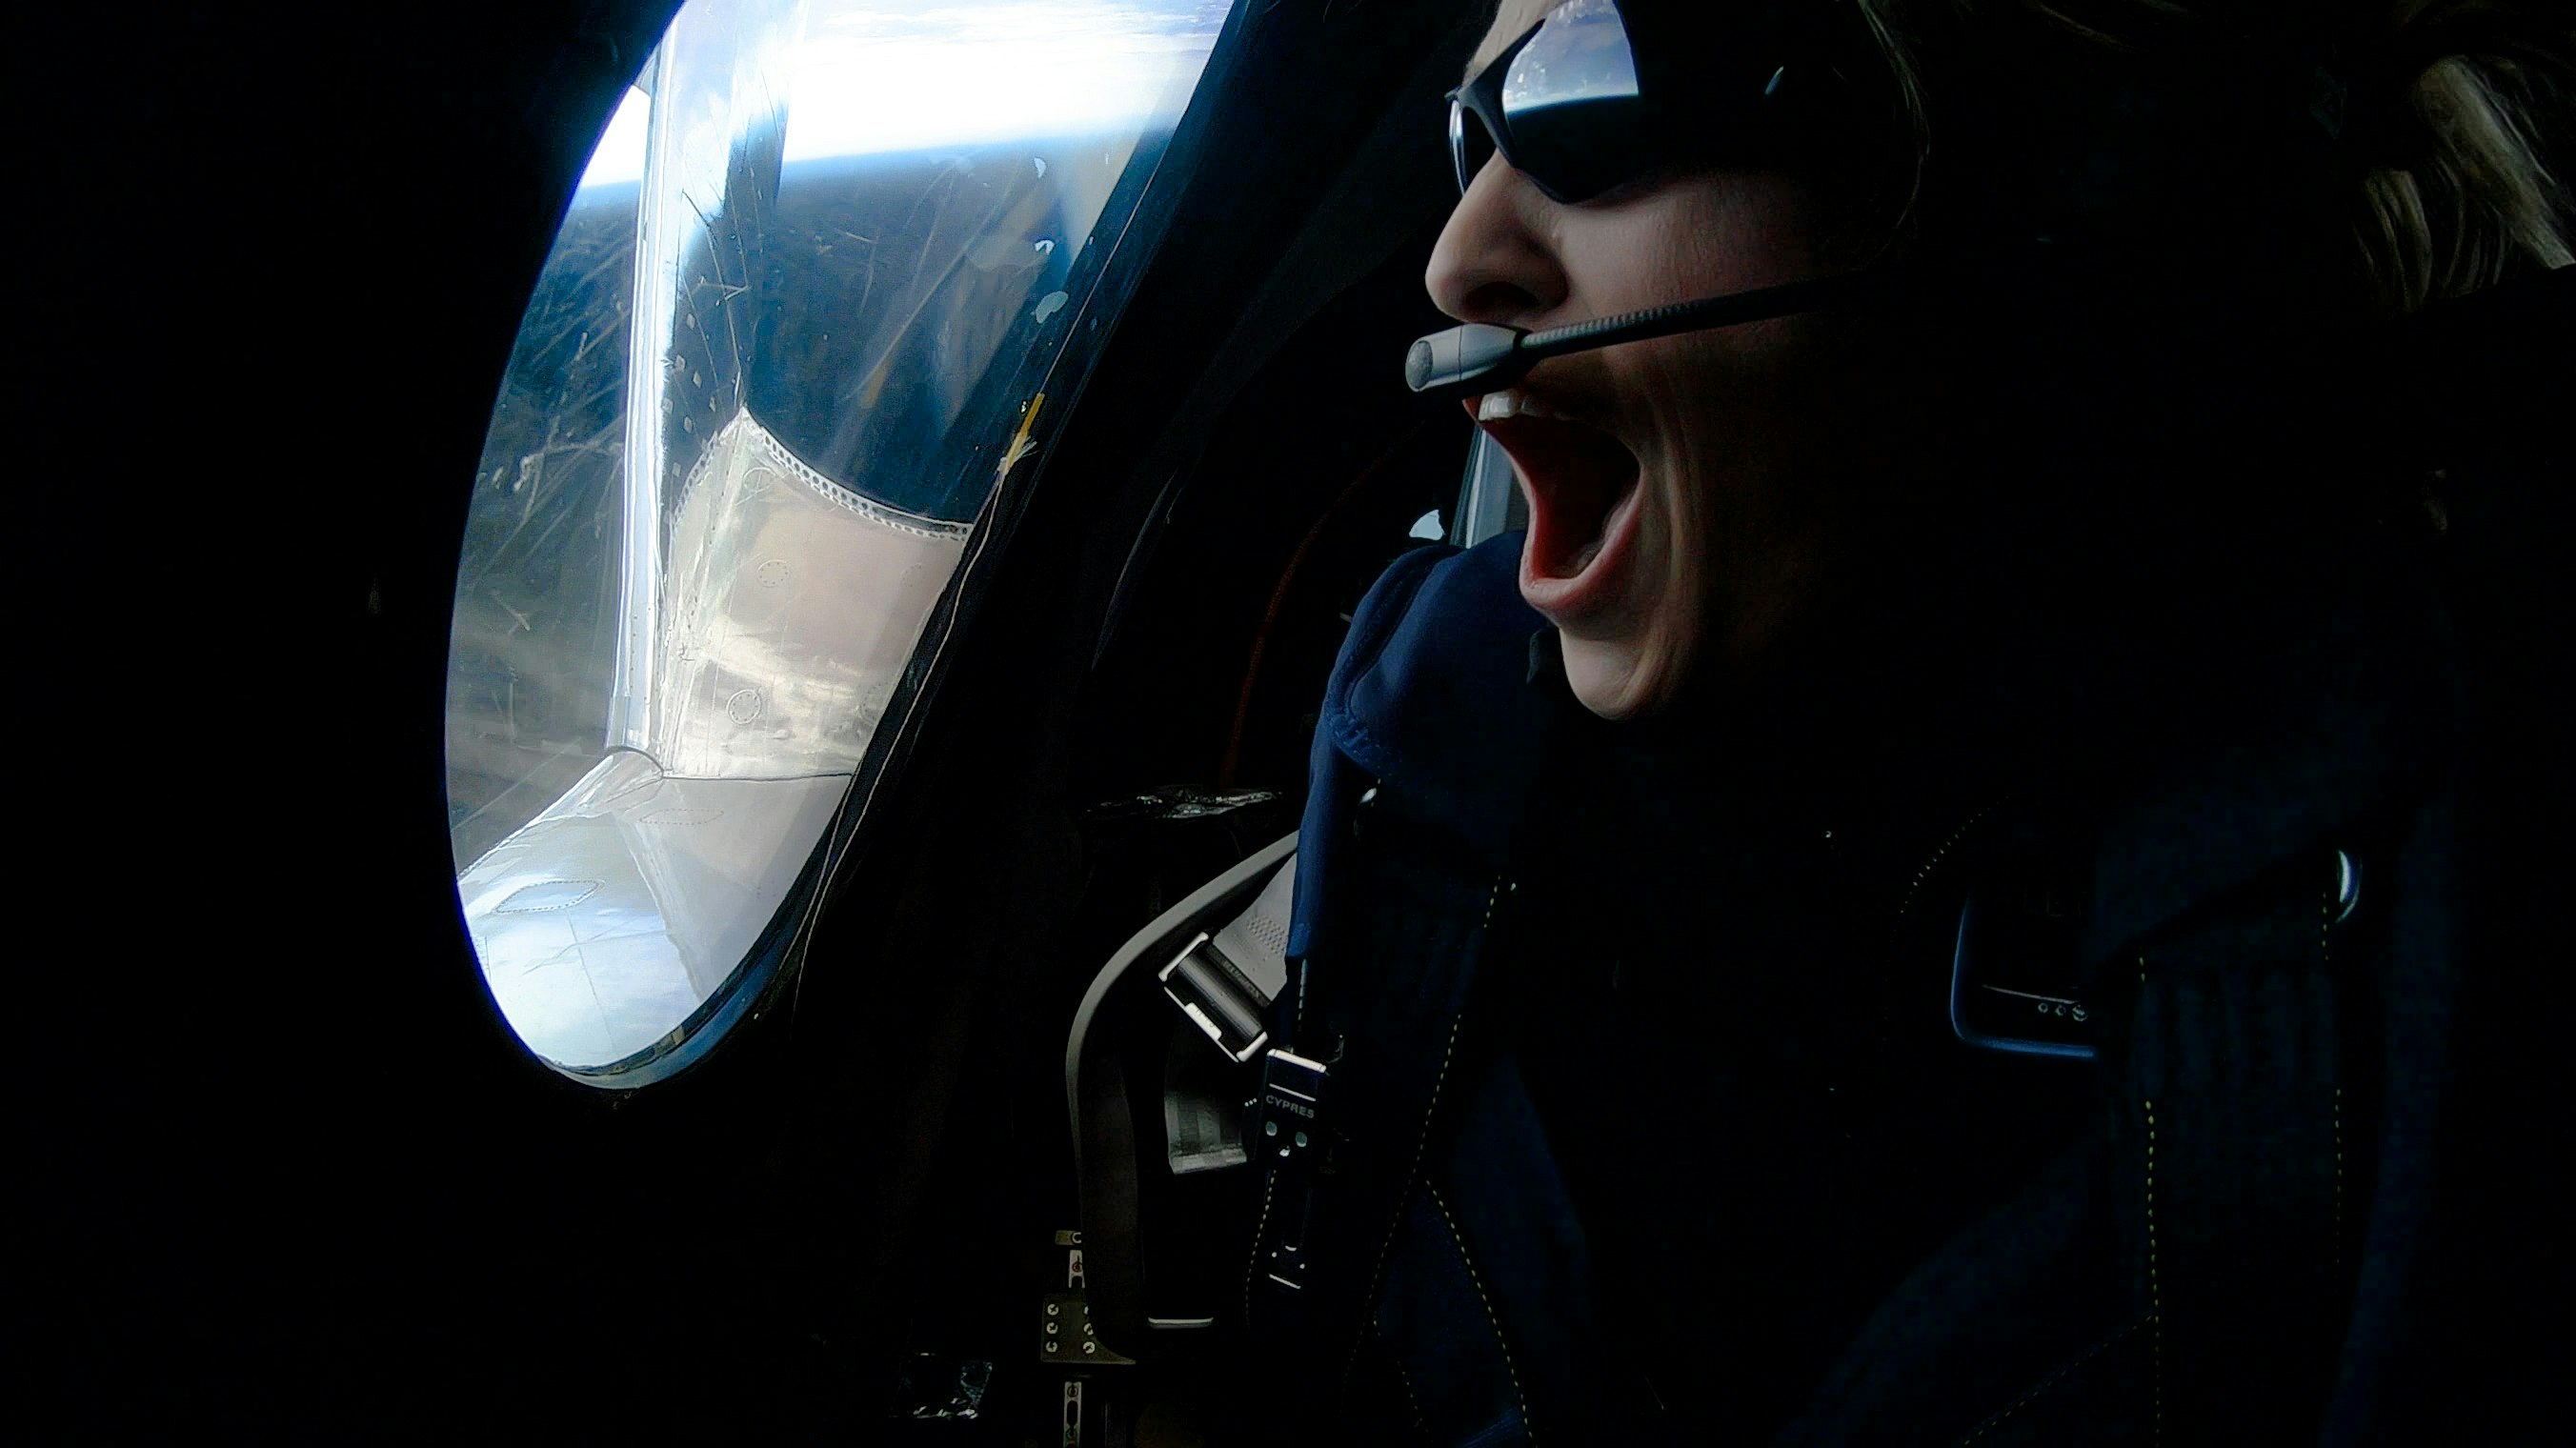 Virgin astronaut in space, wearing sunglasses and smiling while talking into a headset